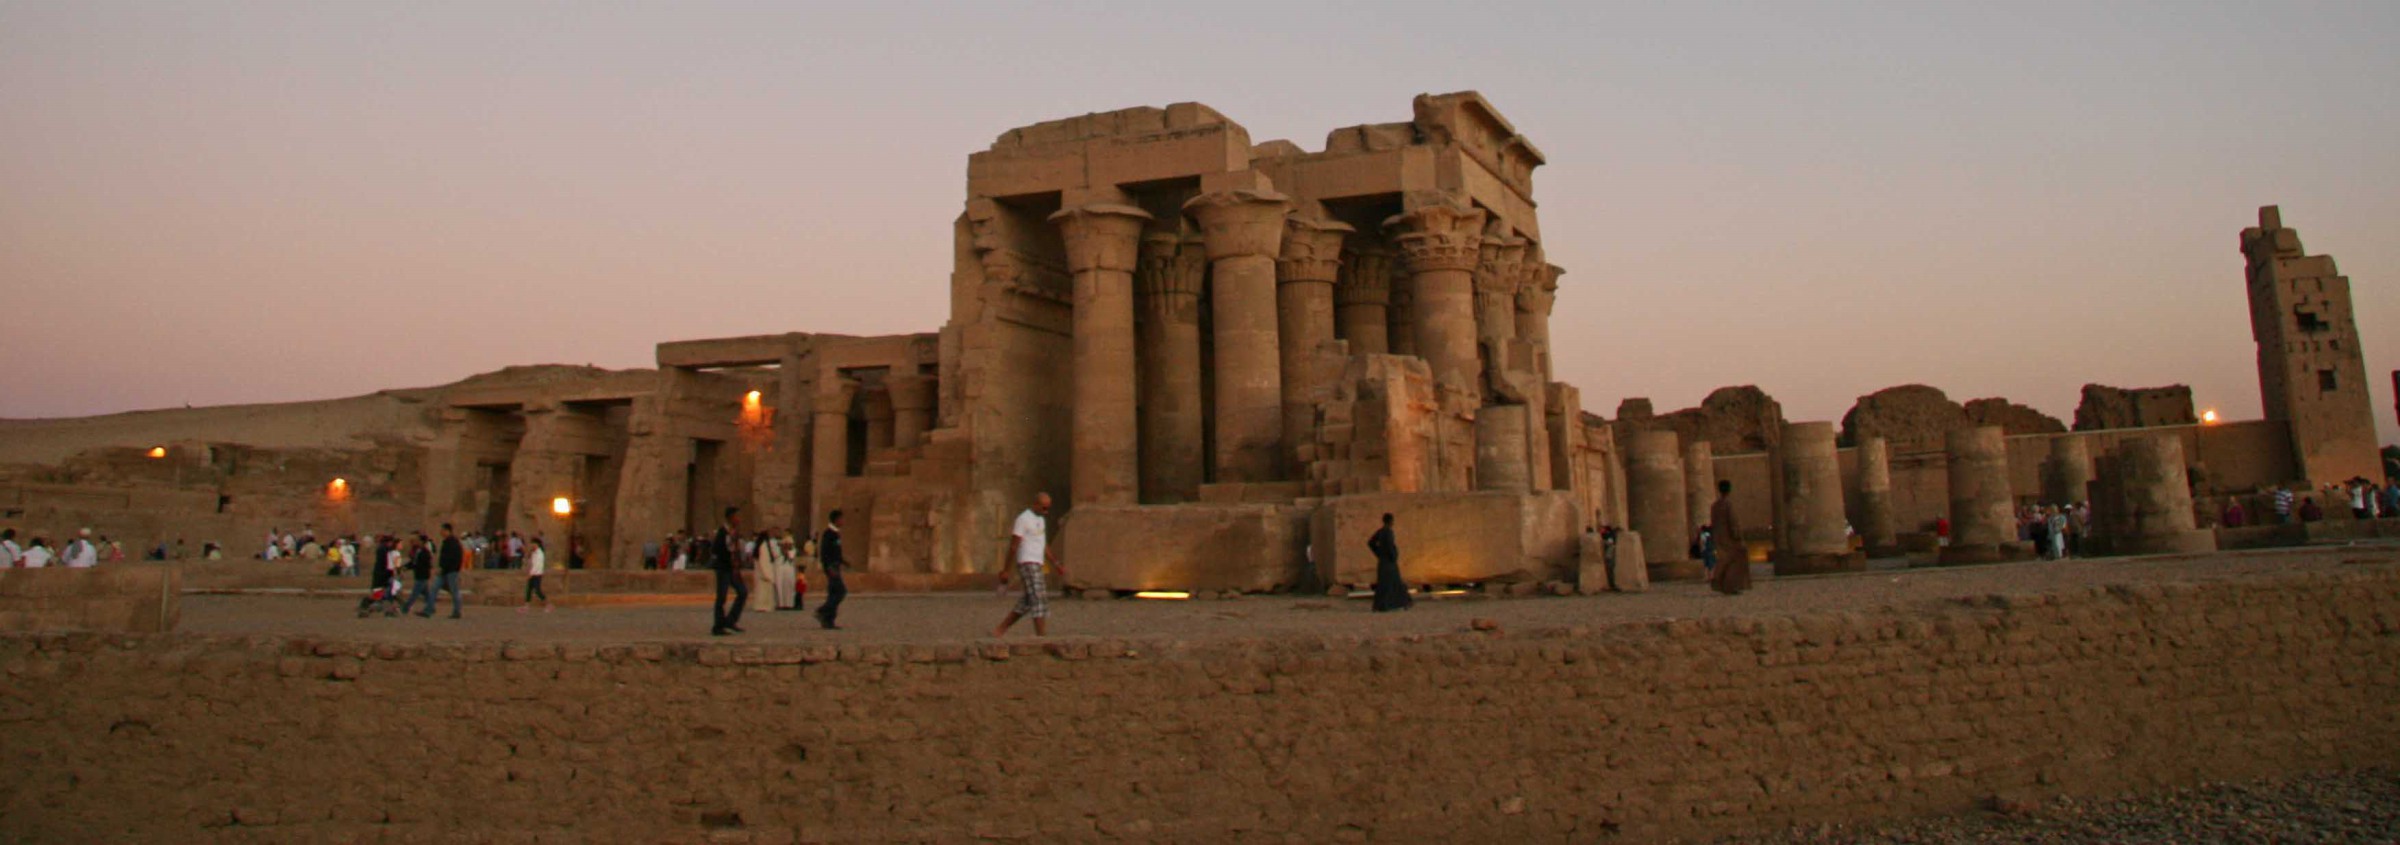 Temple of Kom Ombo - 180-47 BC